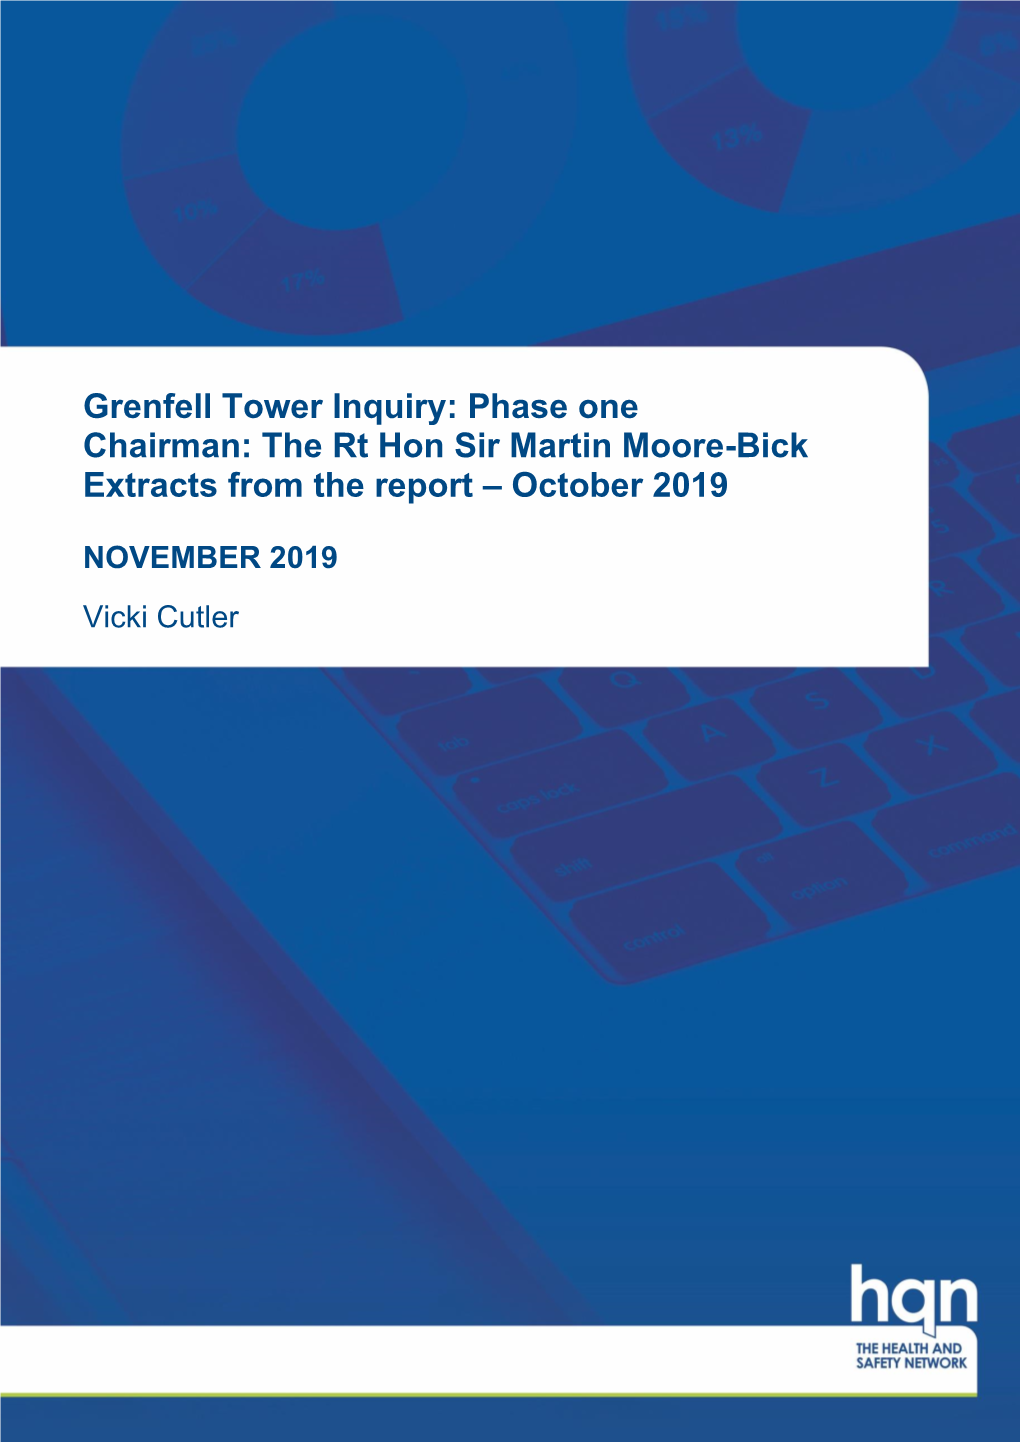 Grenfell Tower Inquiry: Phase One Chairman: the Rt Hon Sir Martin Moore-Bick Extracts from the Report – October 2019